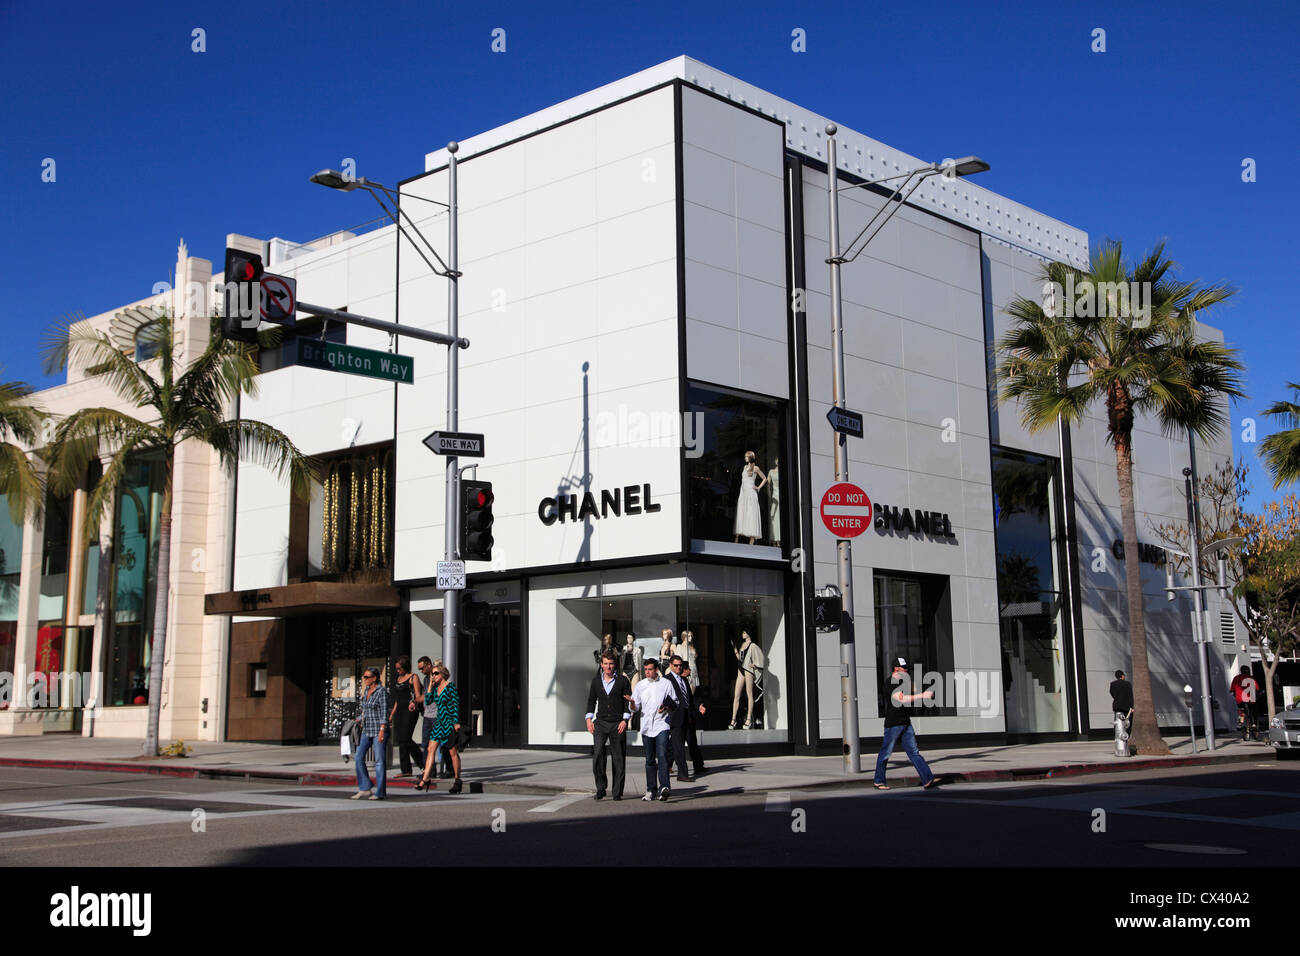 Rodeo Drive - The stunning CHANEL store at the corner of Rodeo Drive and  Brighton Way!